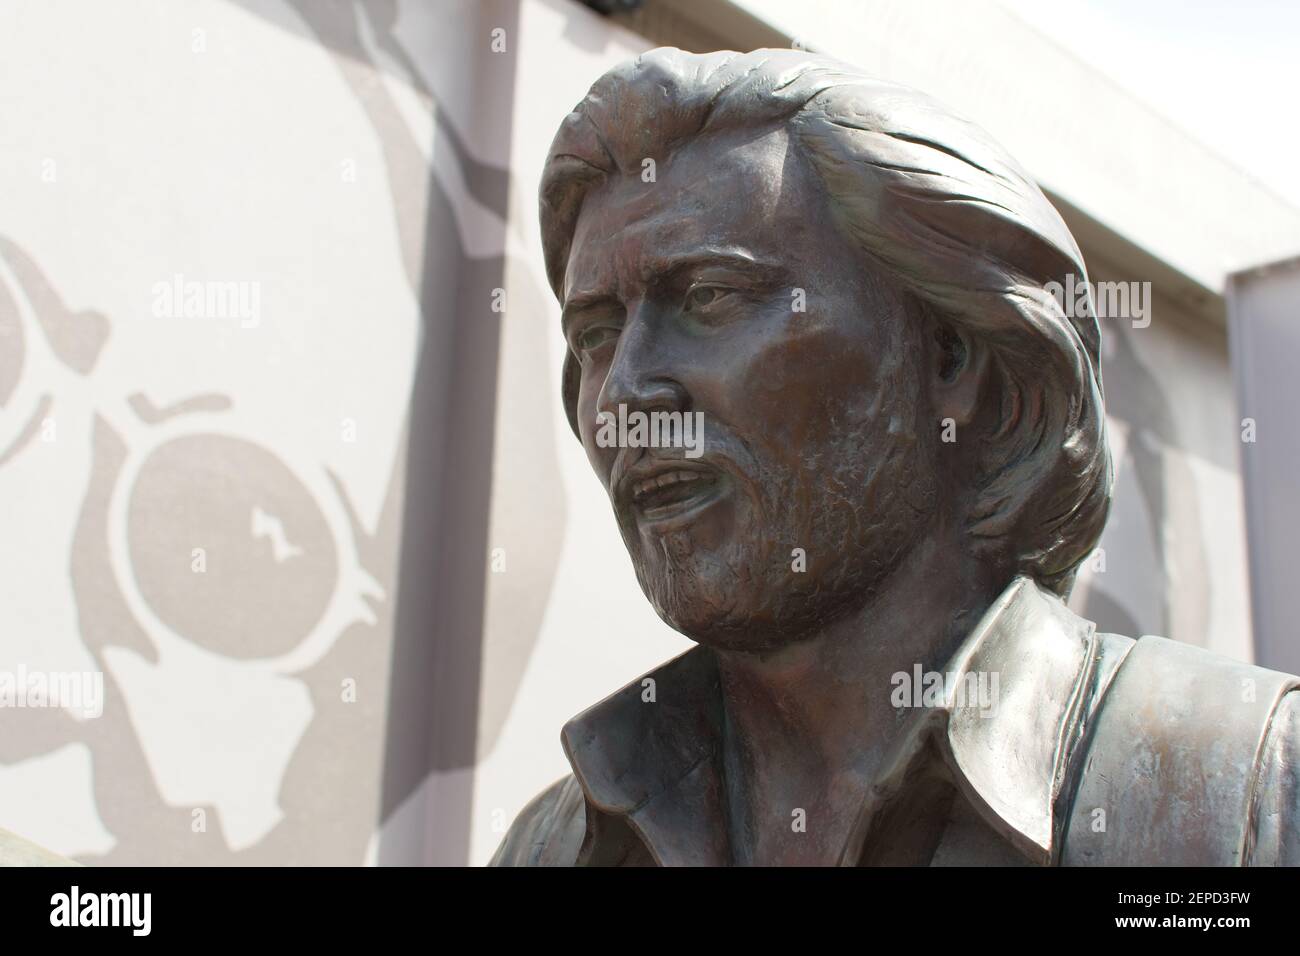 Redcliffe, Queensland, Australia - February 27, 2021: Close up of statue of Maurice Gibb Stock Photo